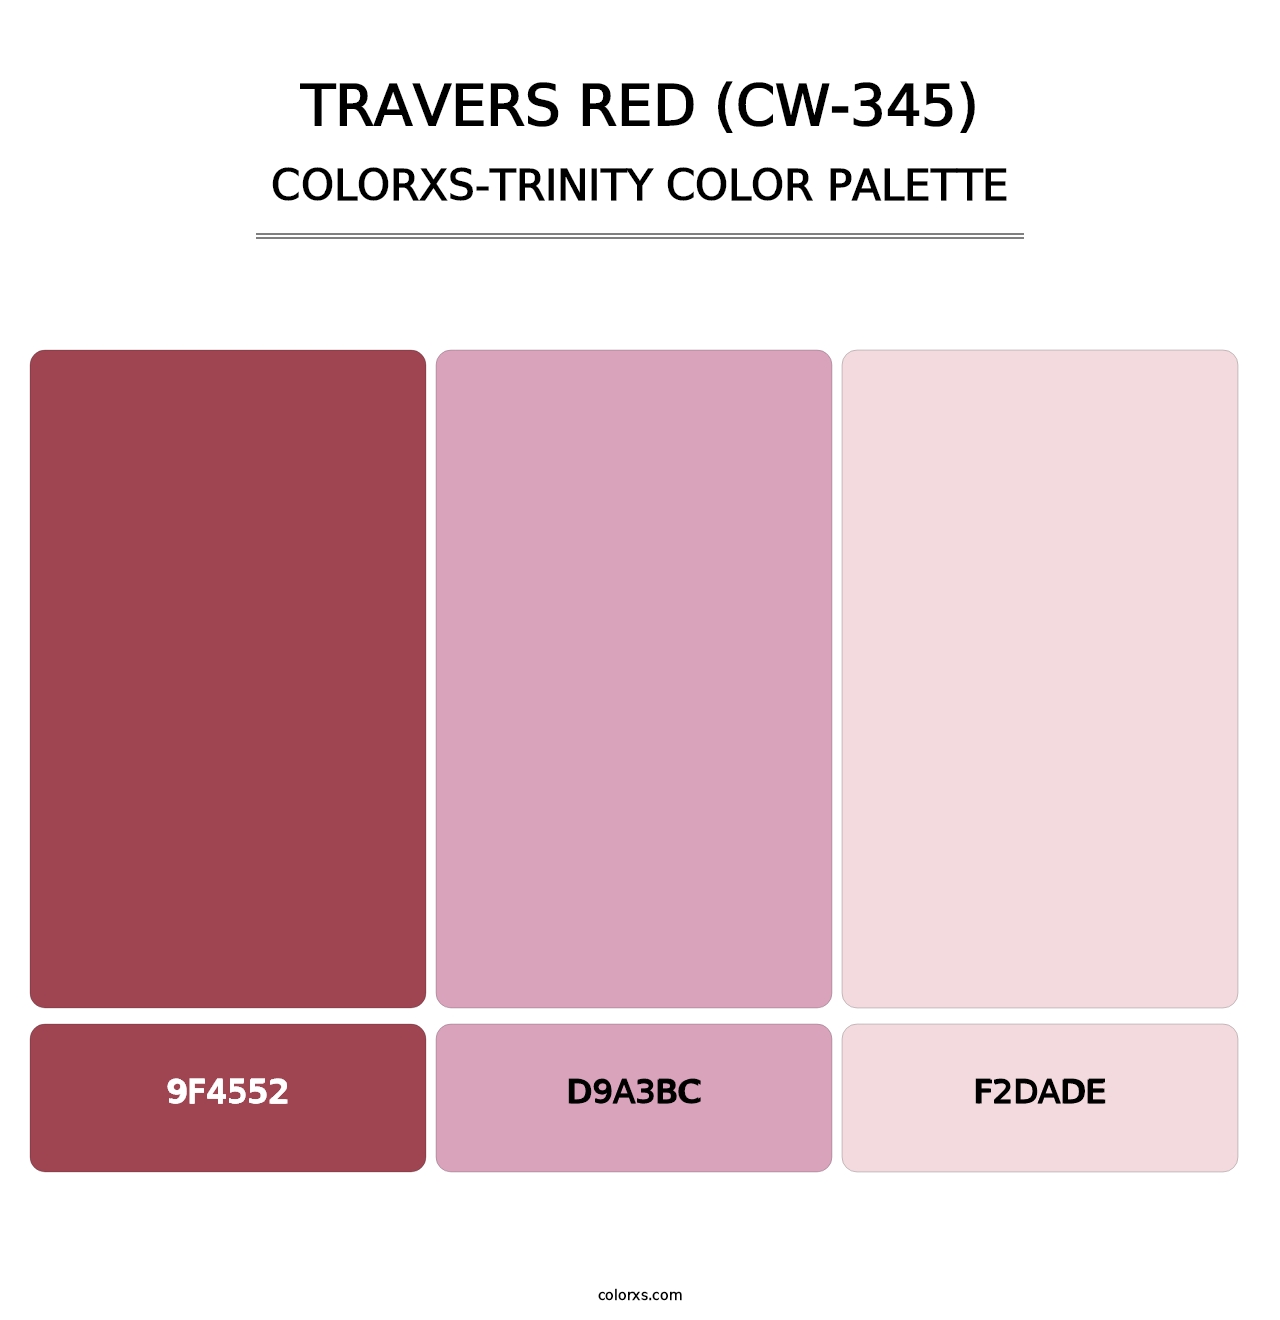 Travers Red (CW-345) - Colorxs Trinity Palette